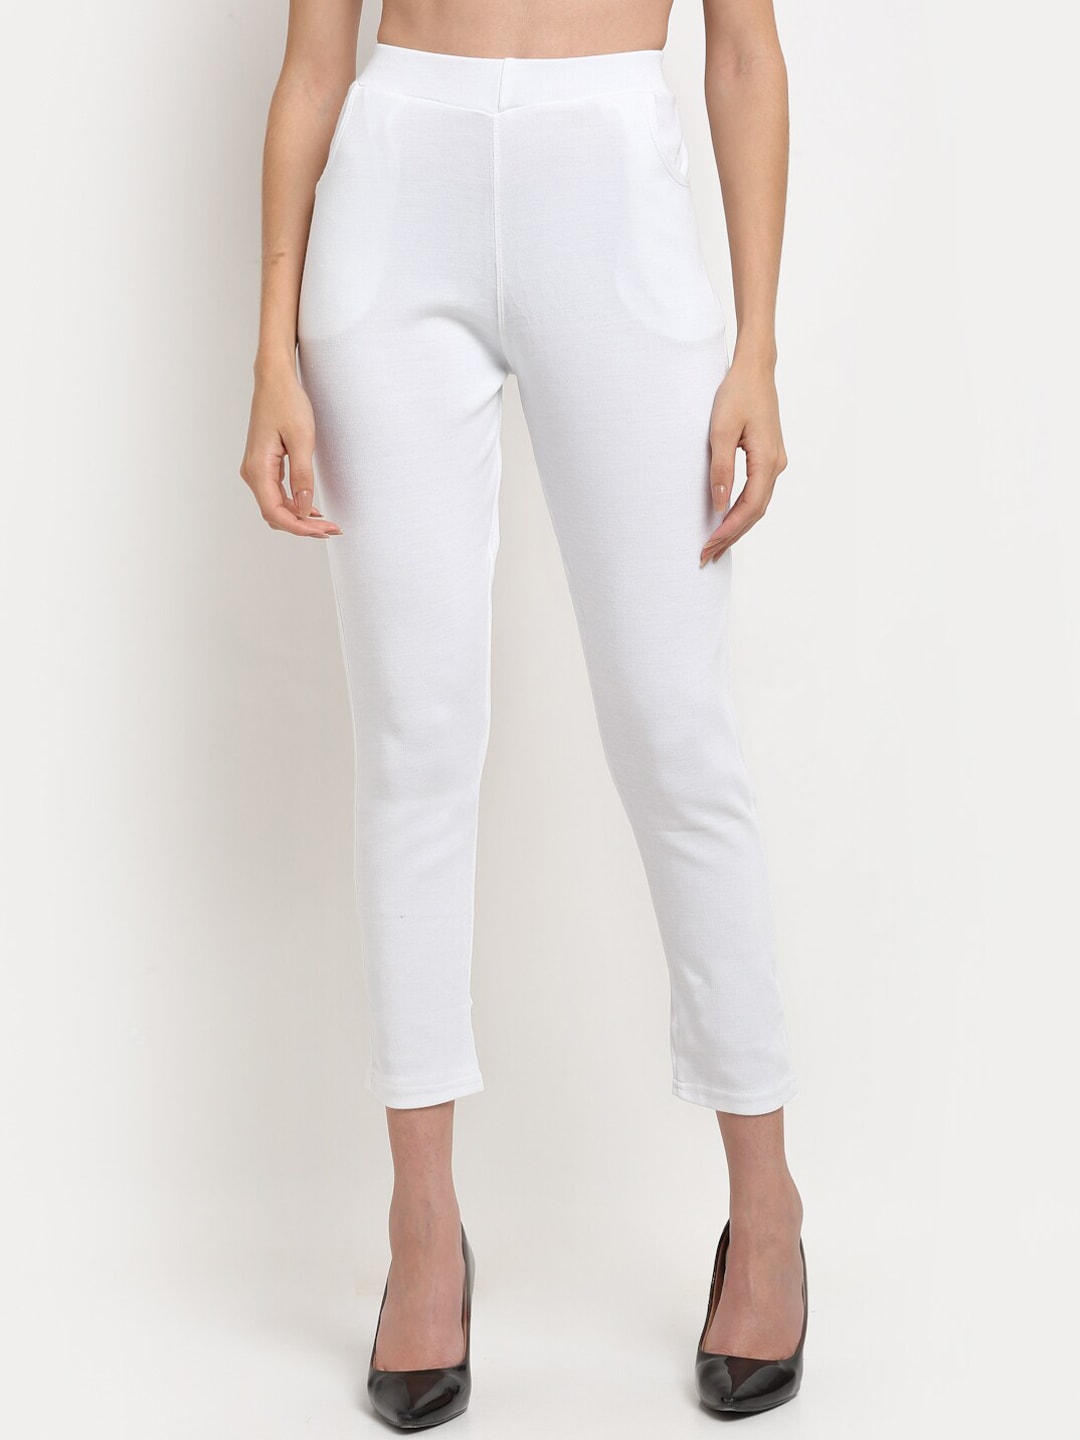 TAG 7 Women White Solid Ankle Length Leggings Pants Price in India, Full  Specifications & Offers